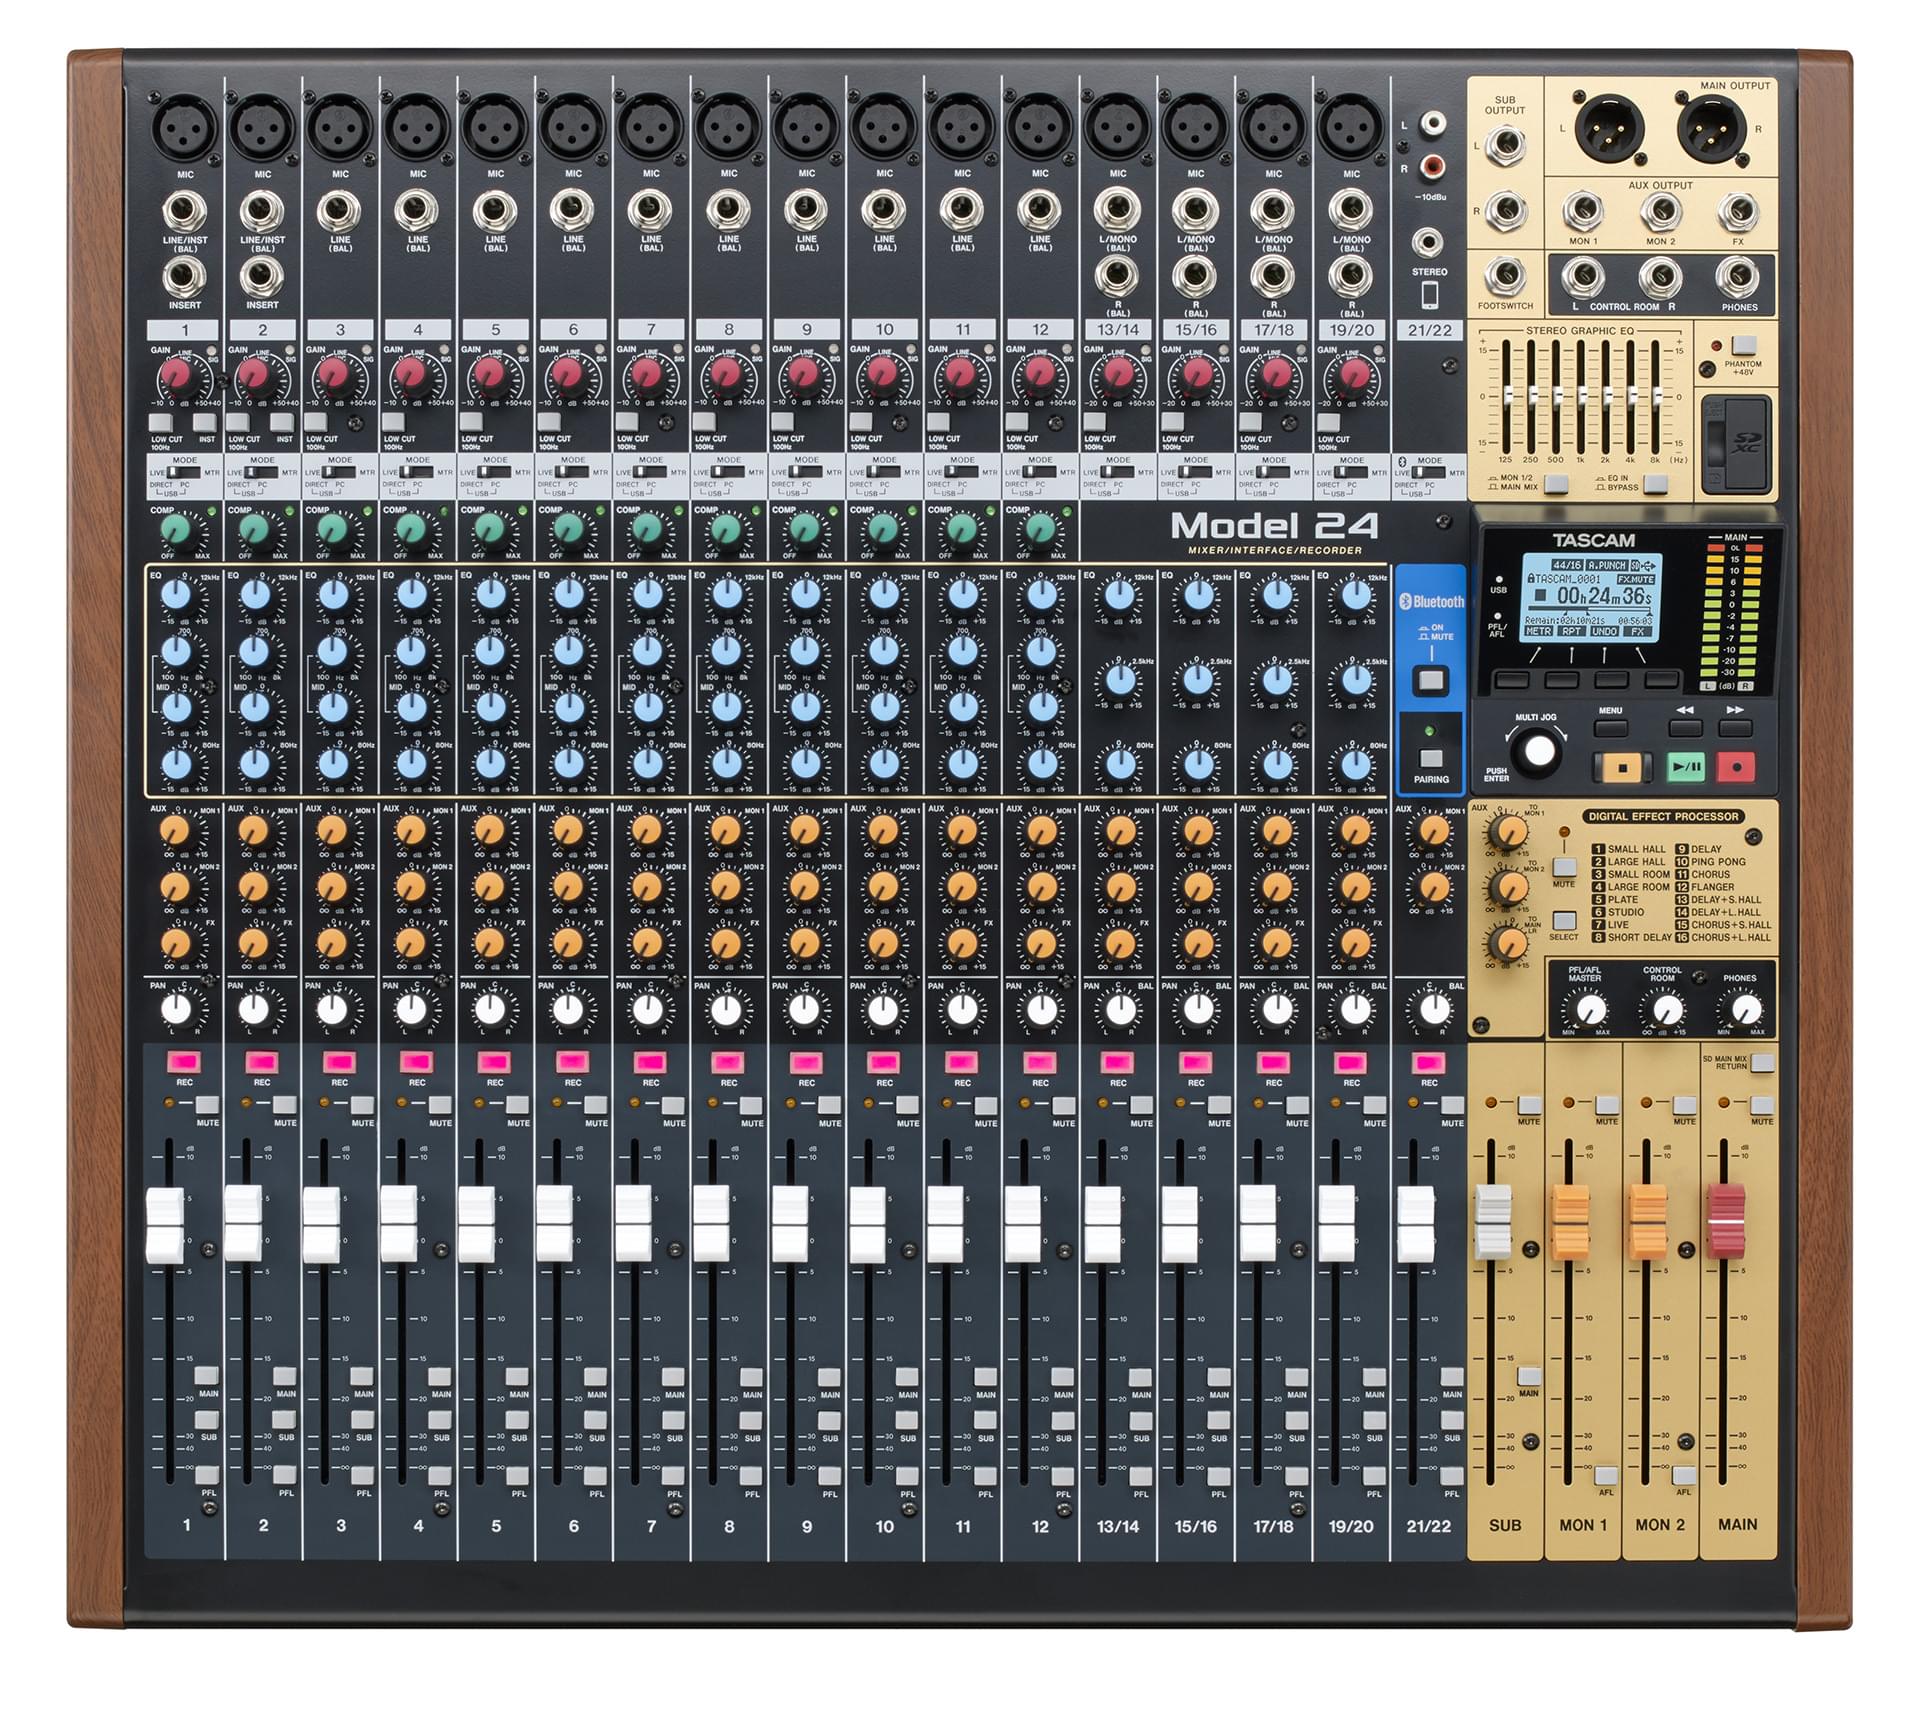 Top view of the Tascam Model 24 Hybrid Recording Console